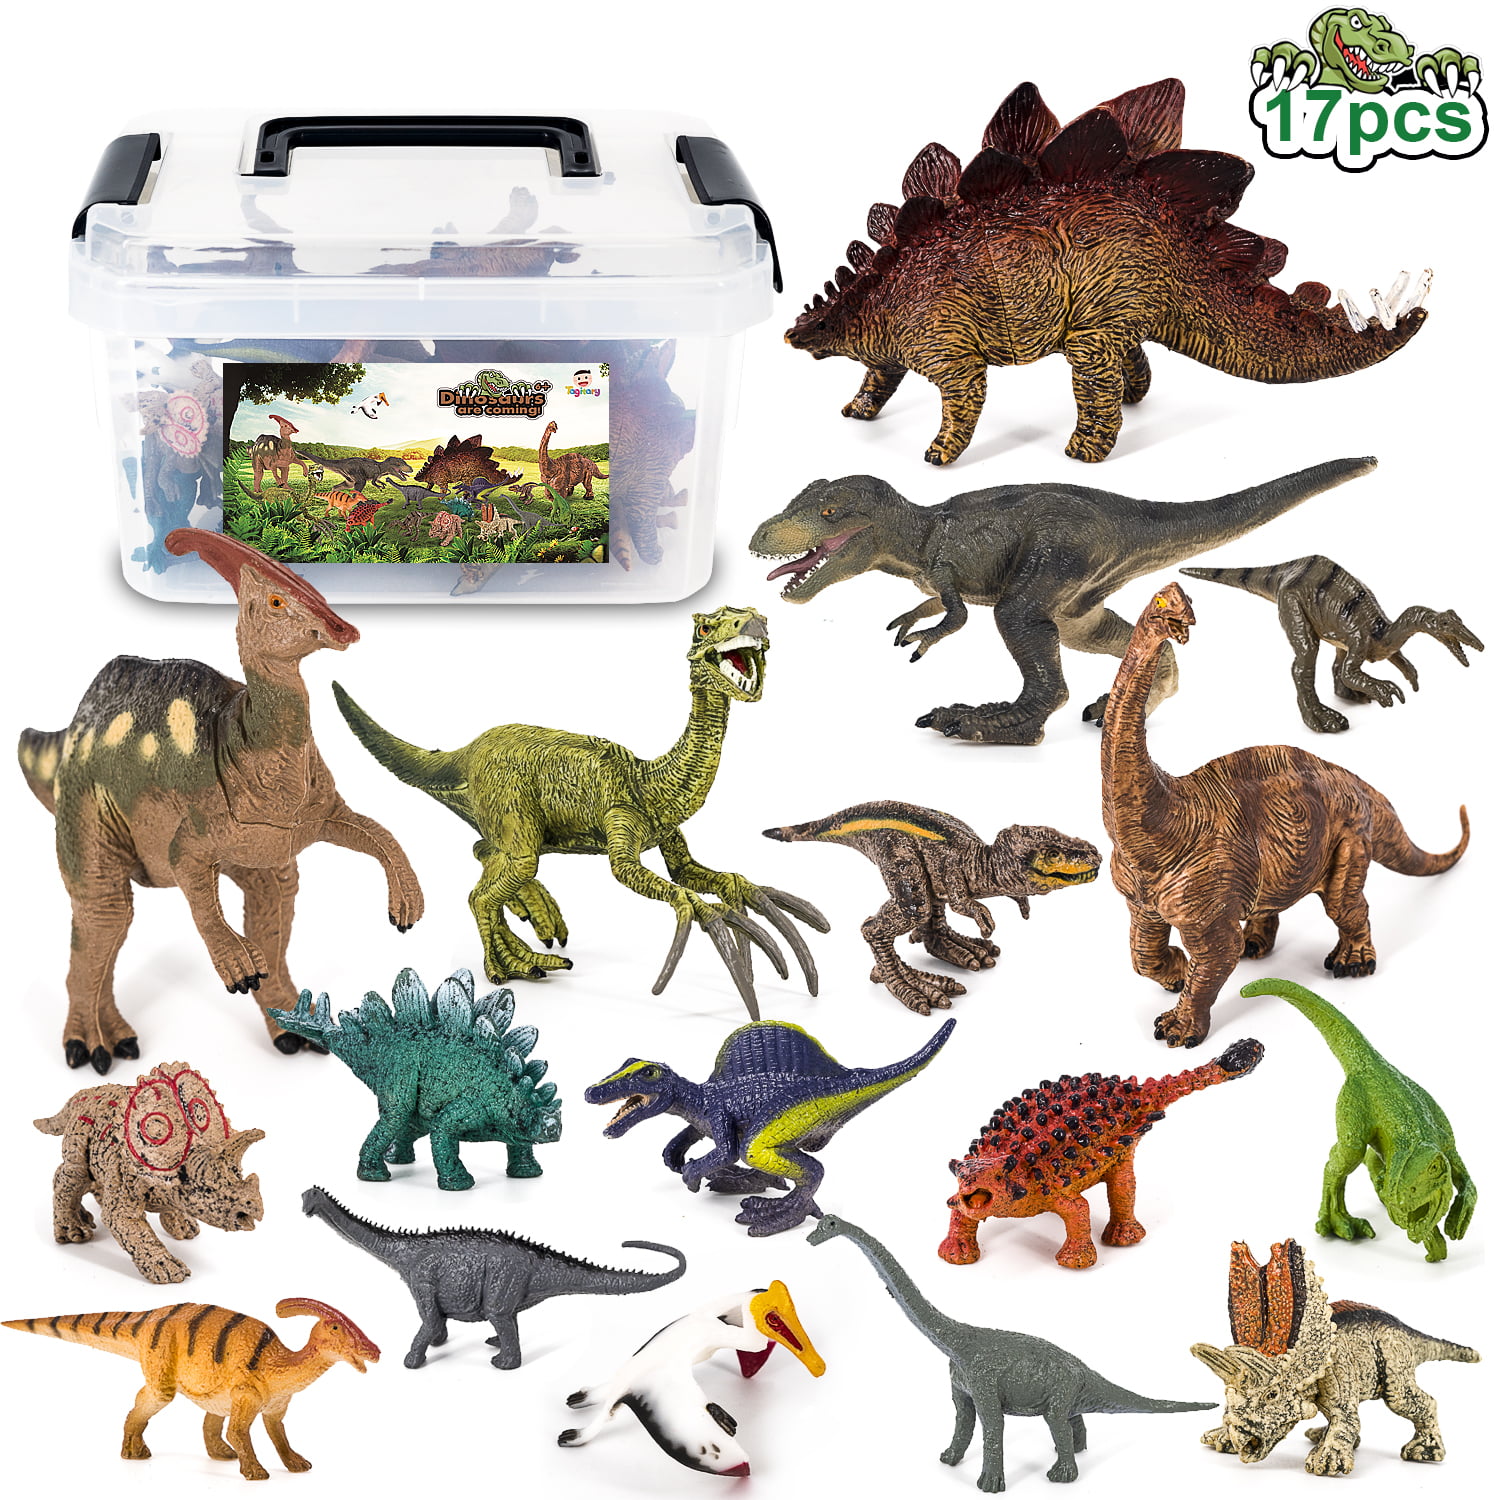 18 NEW TOY DINOSAURS KIDS PLAYSET 2" SIZE DINOSAUR FIGURES DINO PARTY FAVORS 